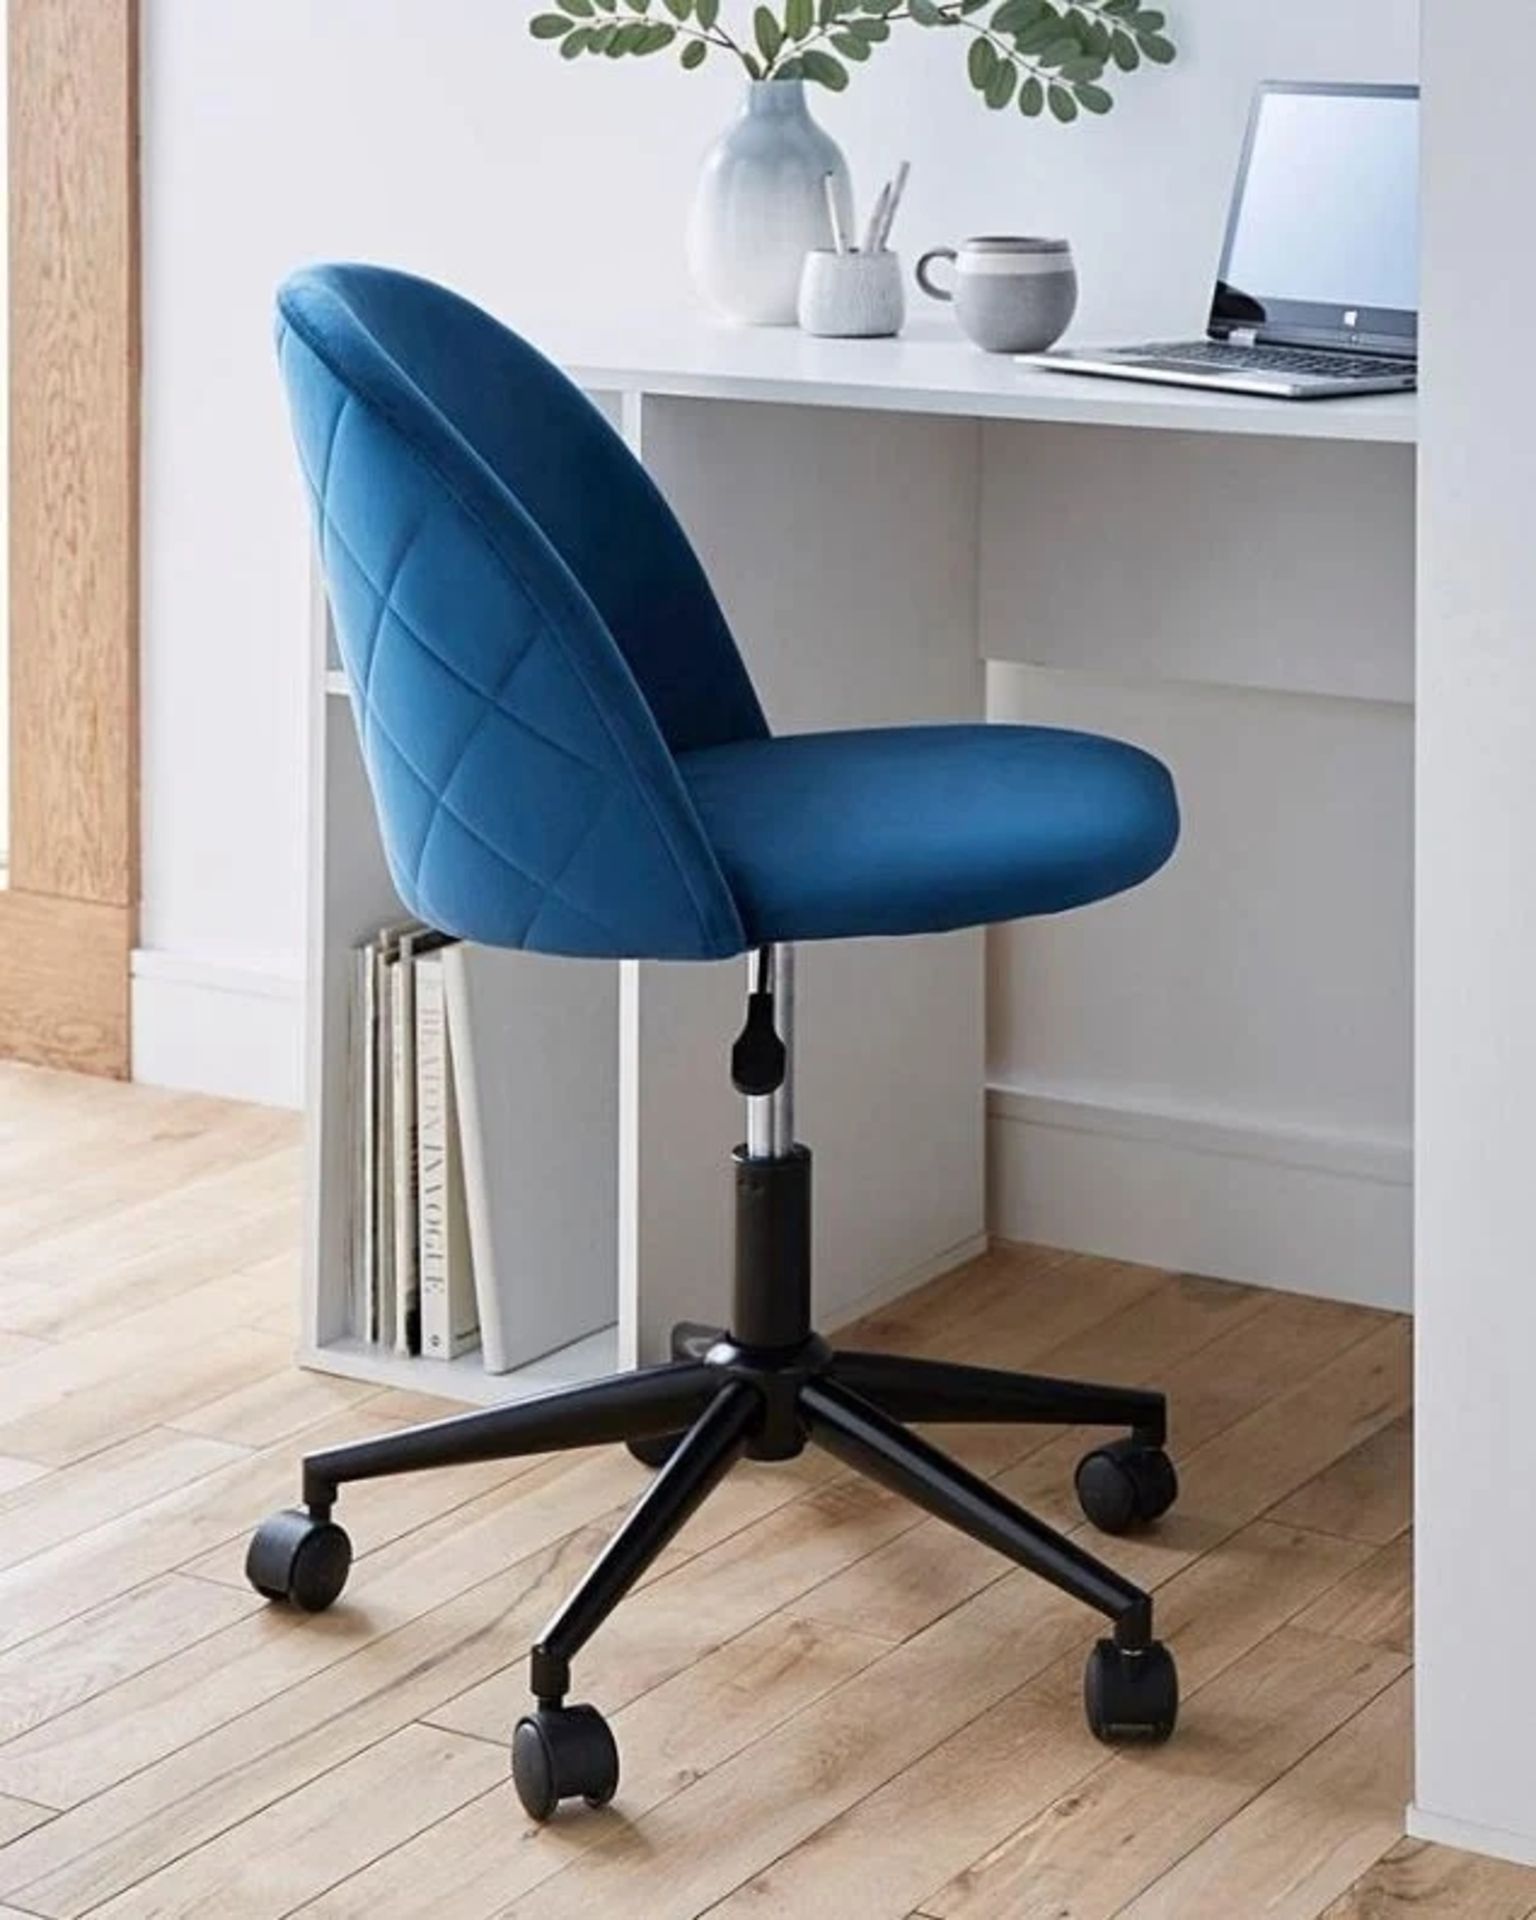 Brand New & Boxed Klara Office Chair - Navy. RRP £199 each. The Klara Office Chair is a luxurious - Image 2 of 3